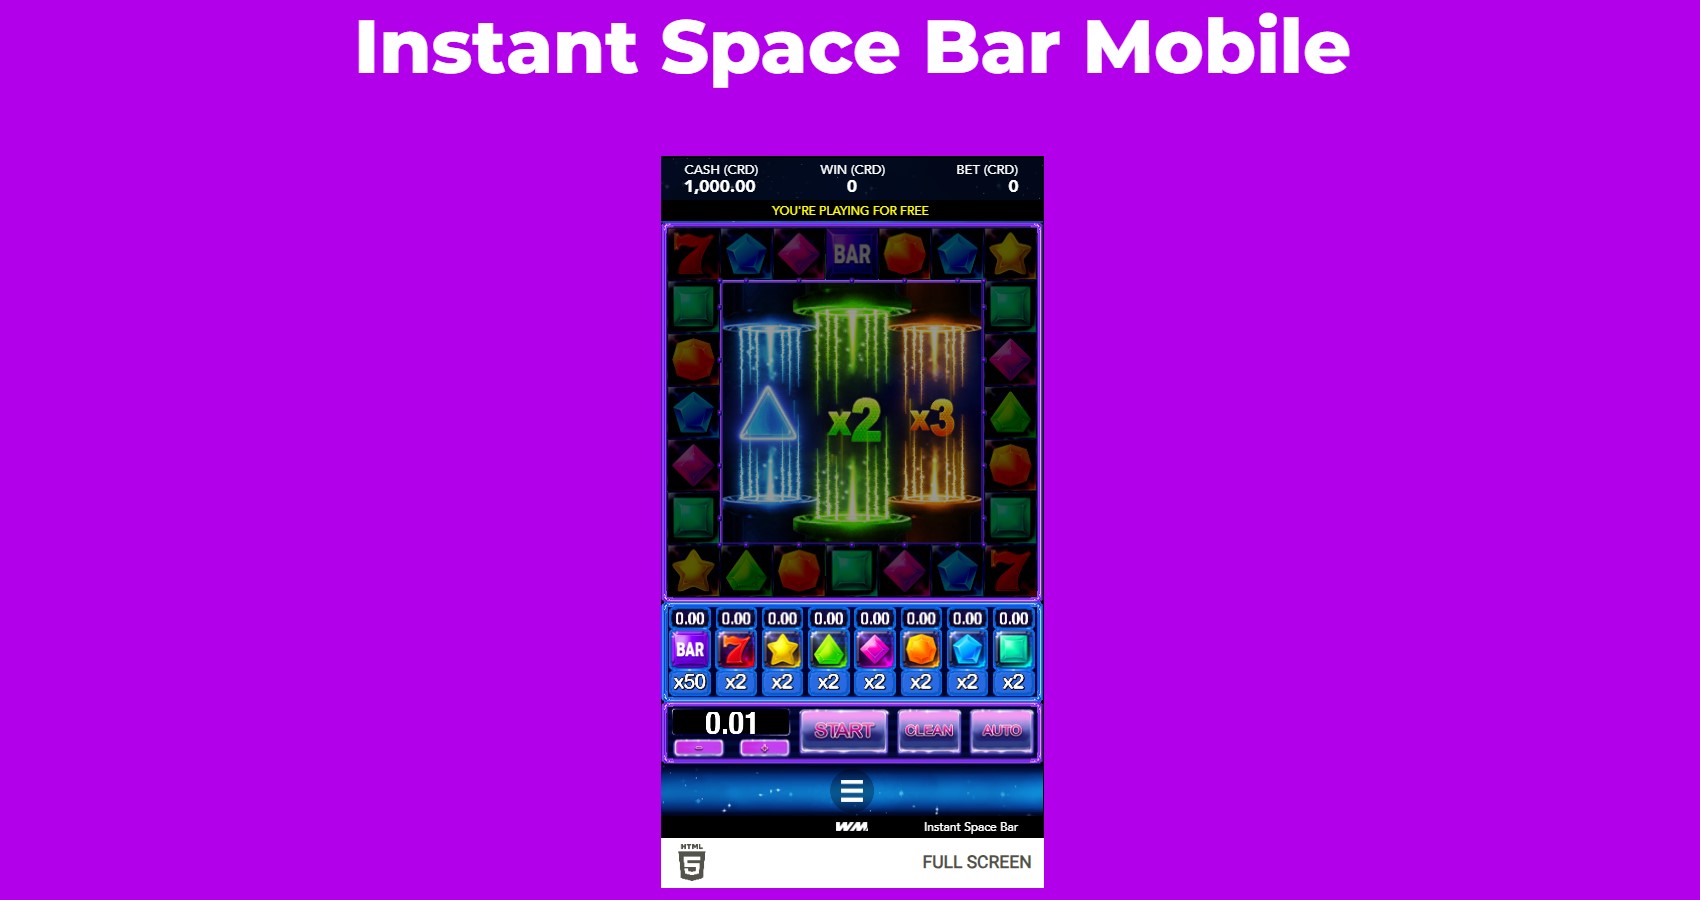 Instant Space Bar mobiilne versioon